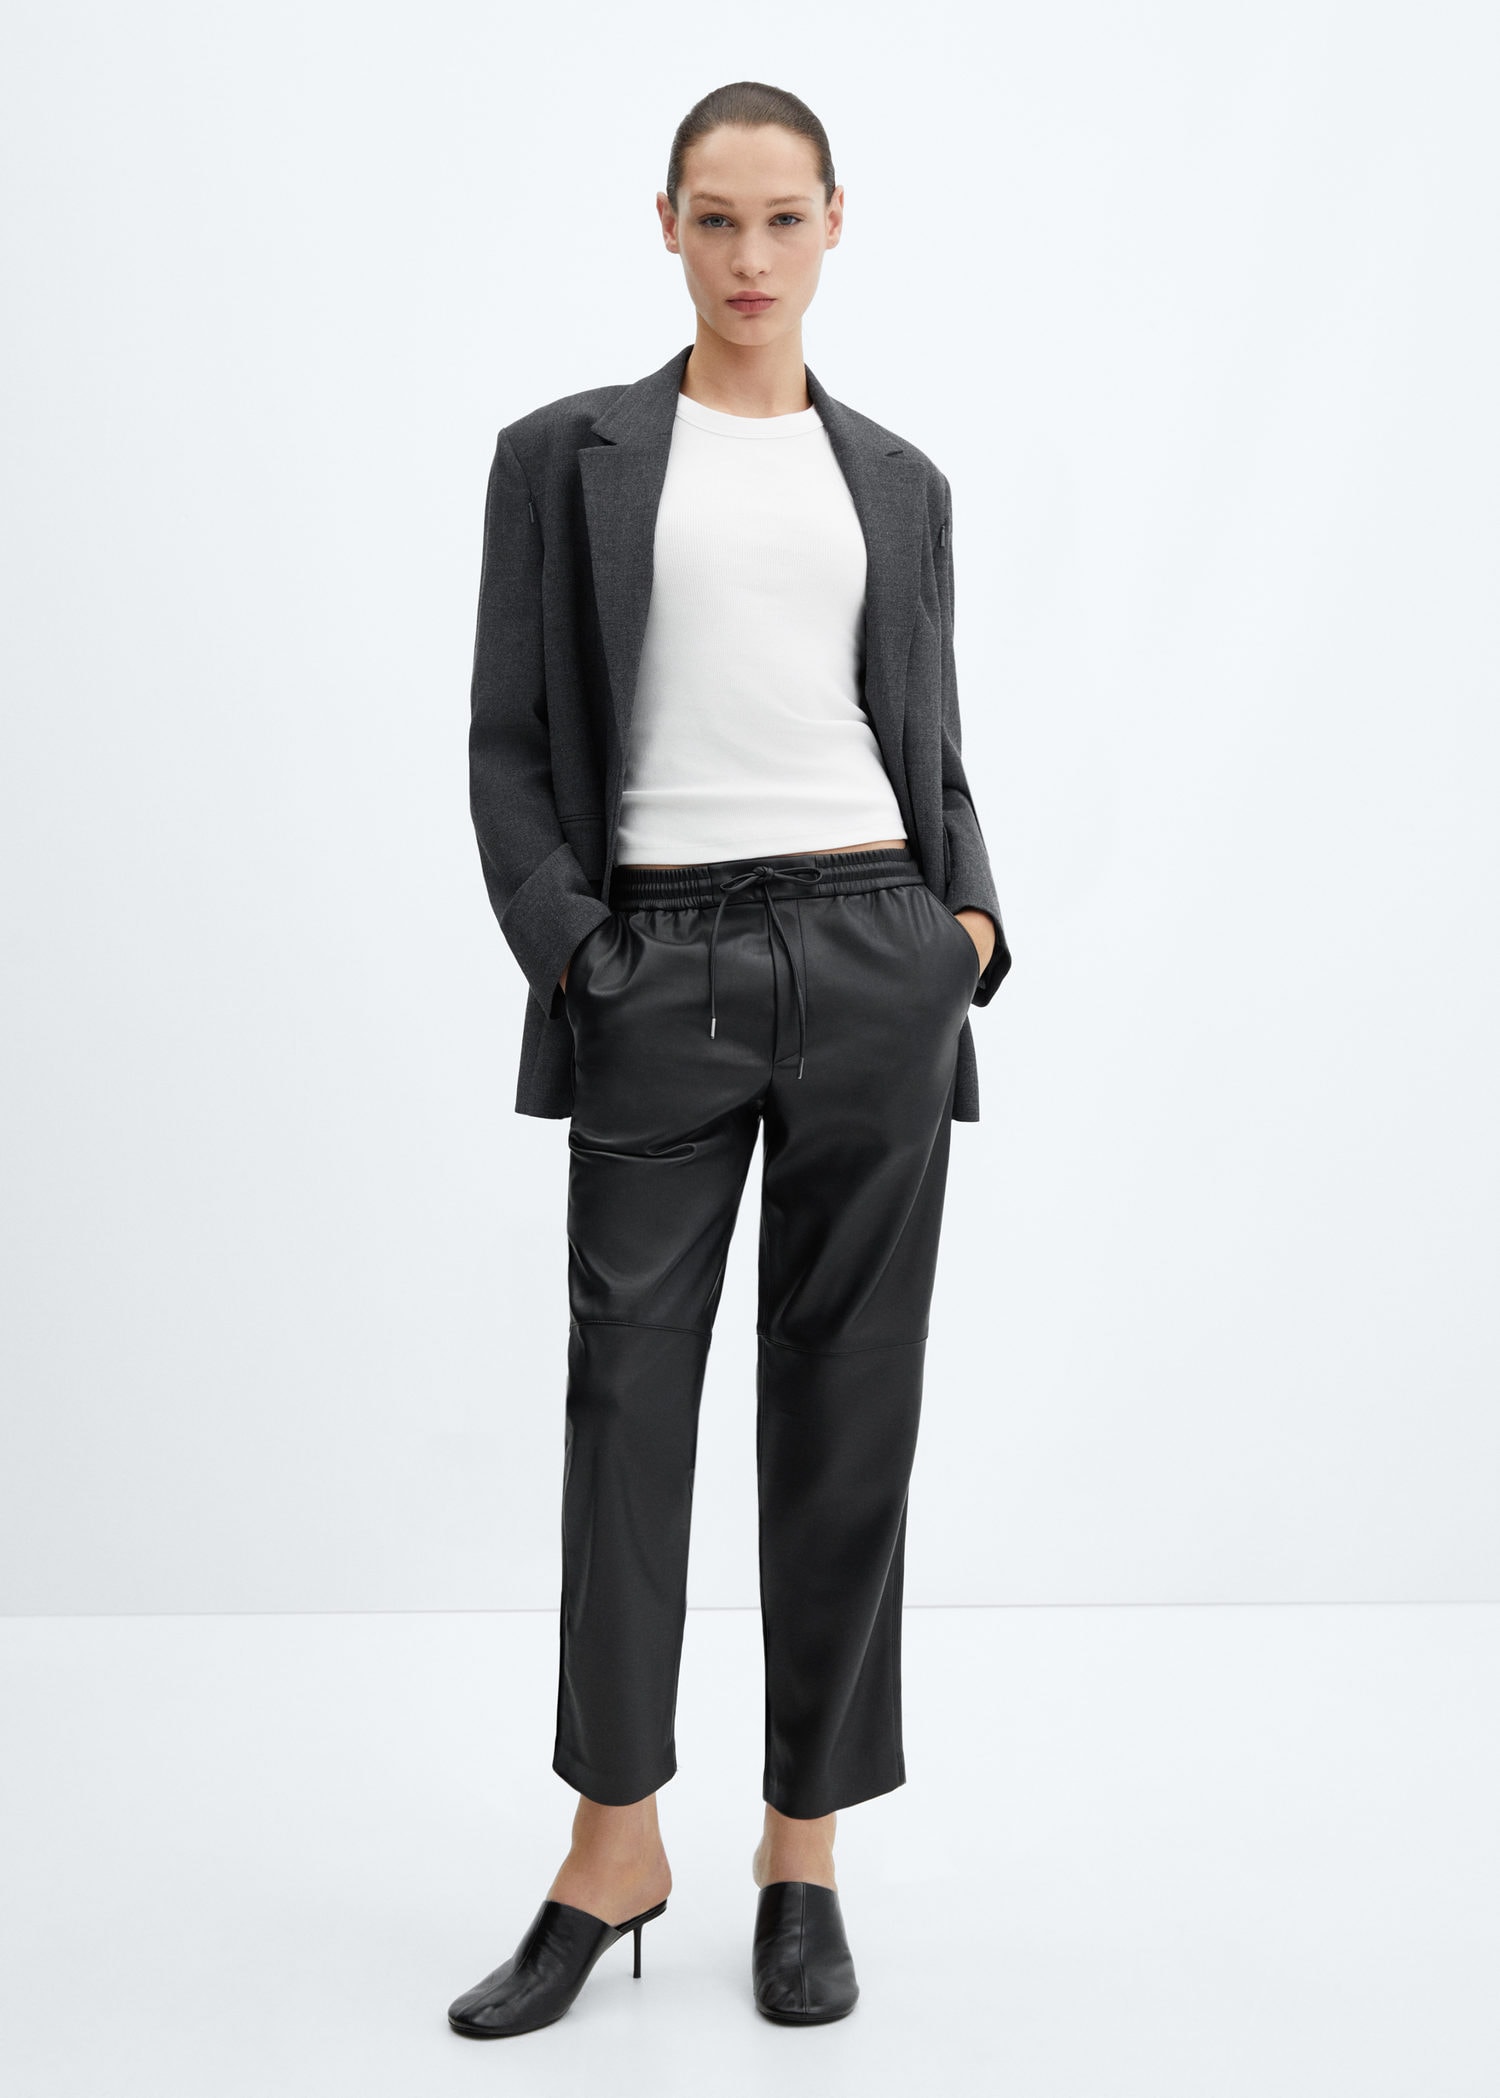 Men's Tailored and Suit Trousers | Explore our New Arrivals | ZARA Malaysia